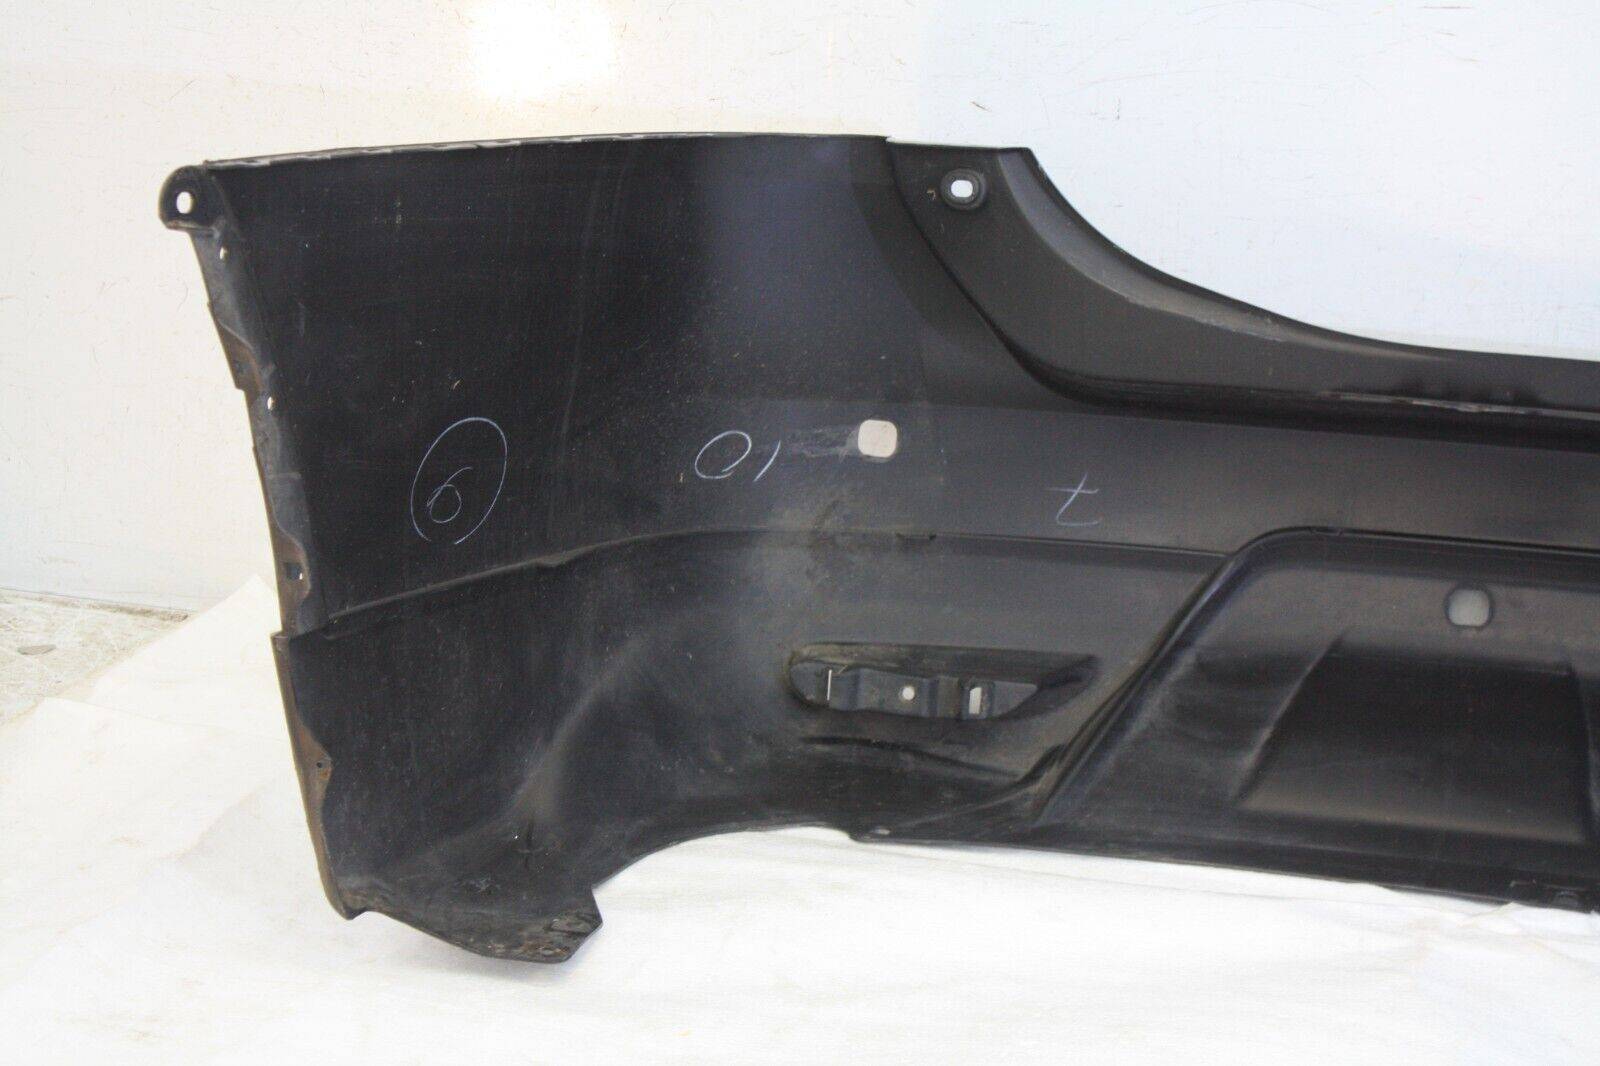 Nissan-X-Trail-Rear-Bumper-2014-TO-2017-85022-4CN0H-Genuine-SEE-PICS-CAREFULLY-176208735051-16